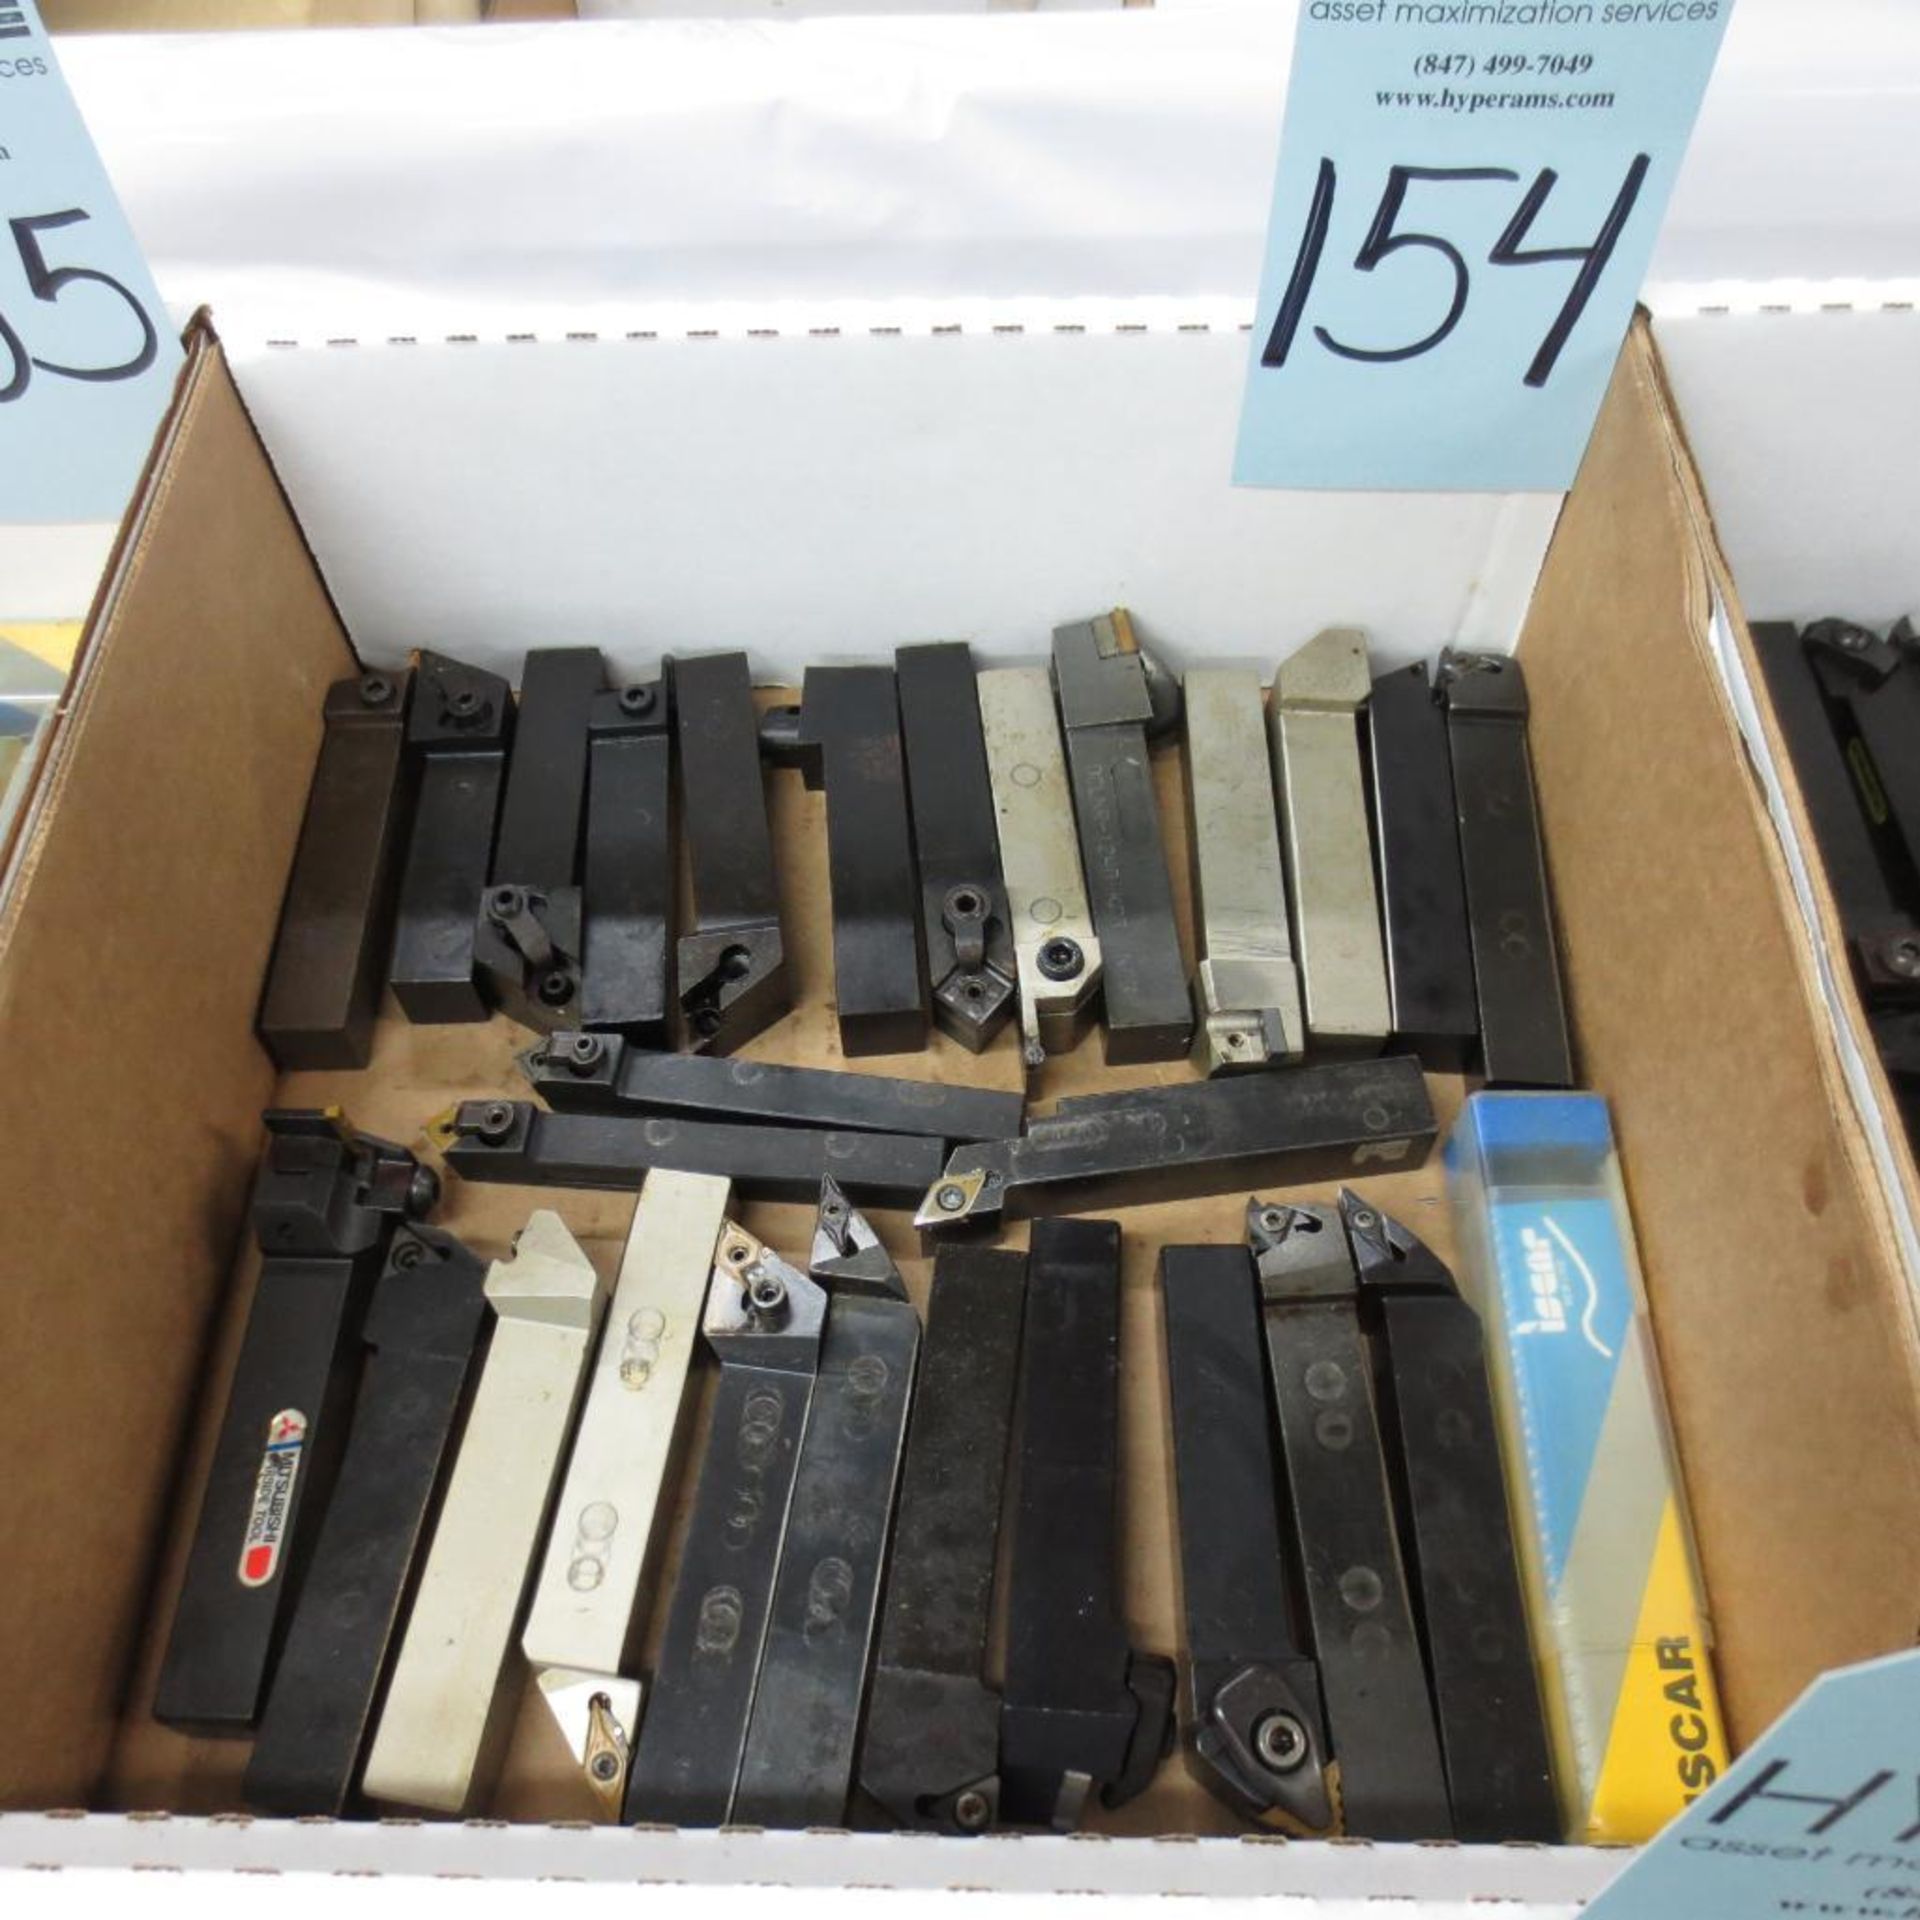 Assorted Tool Holders in one box